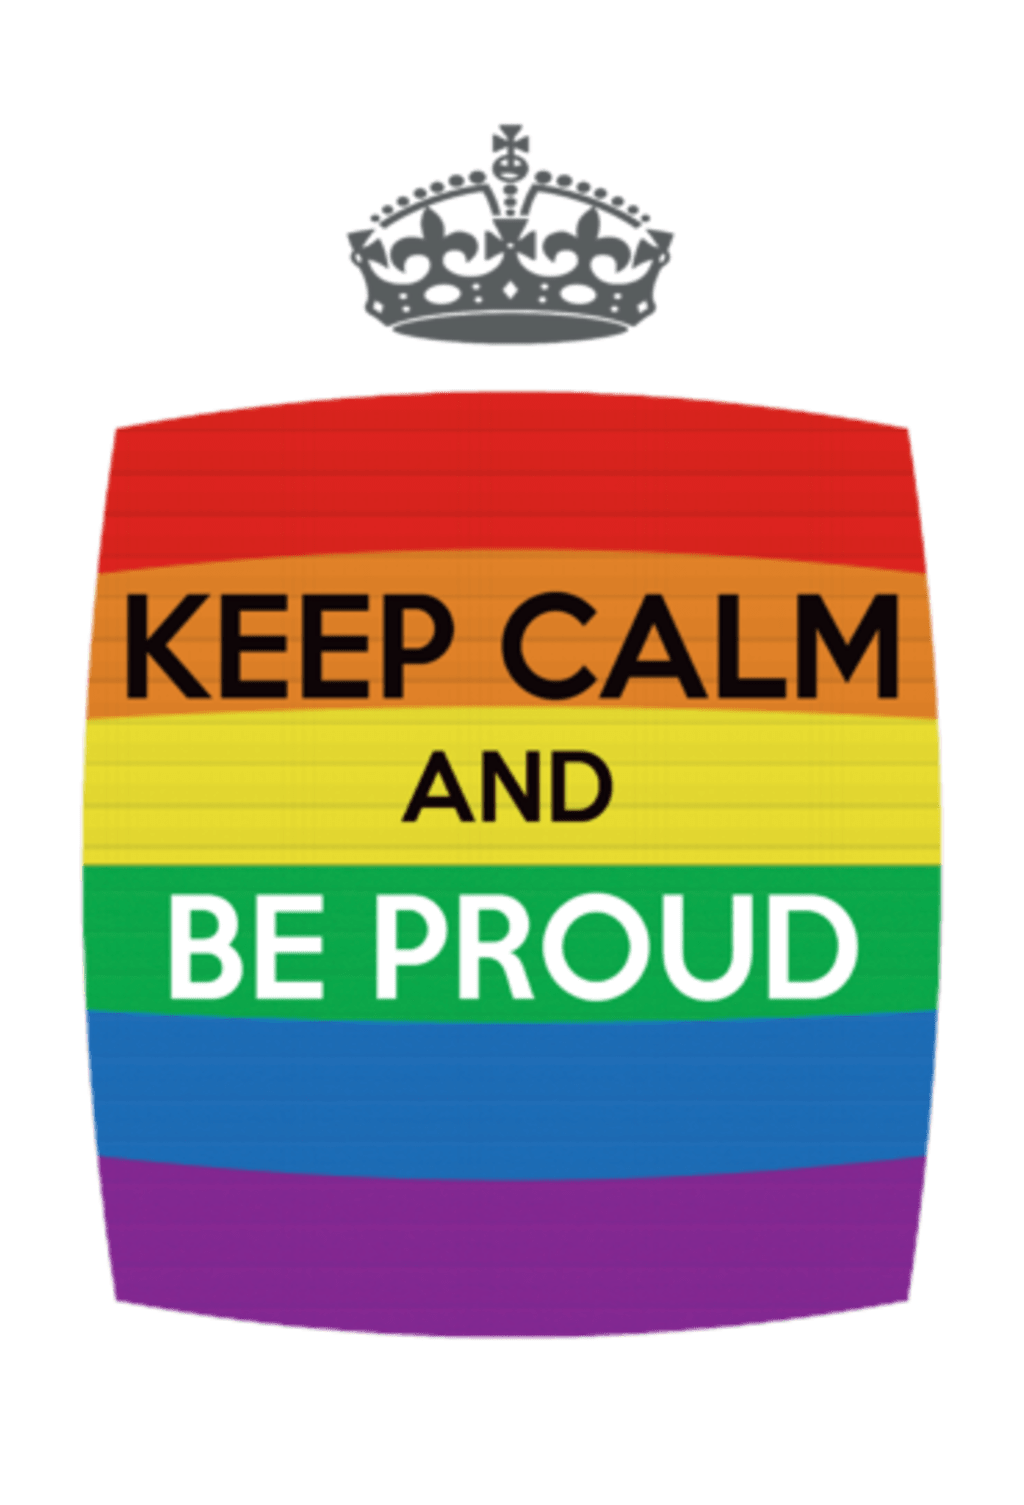 Keep calm and be proud